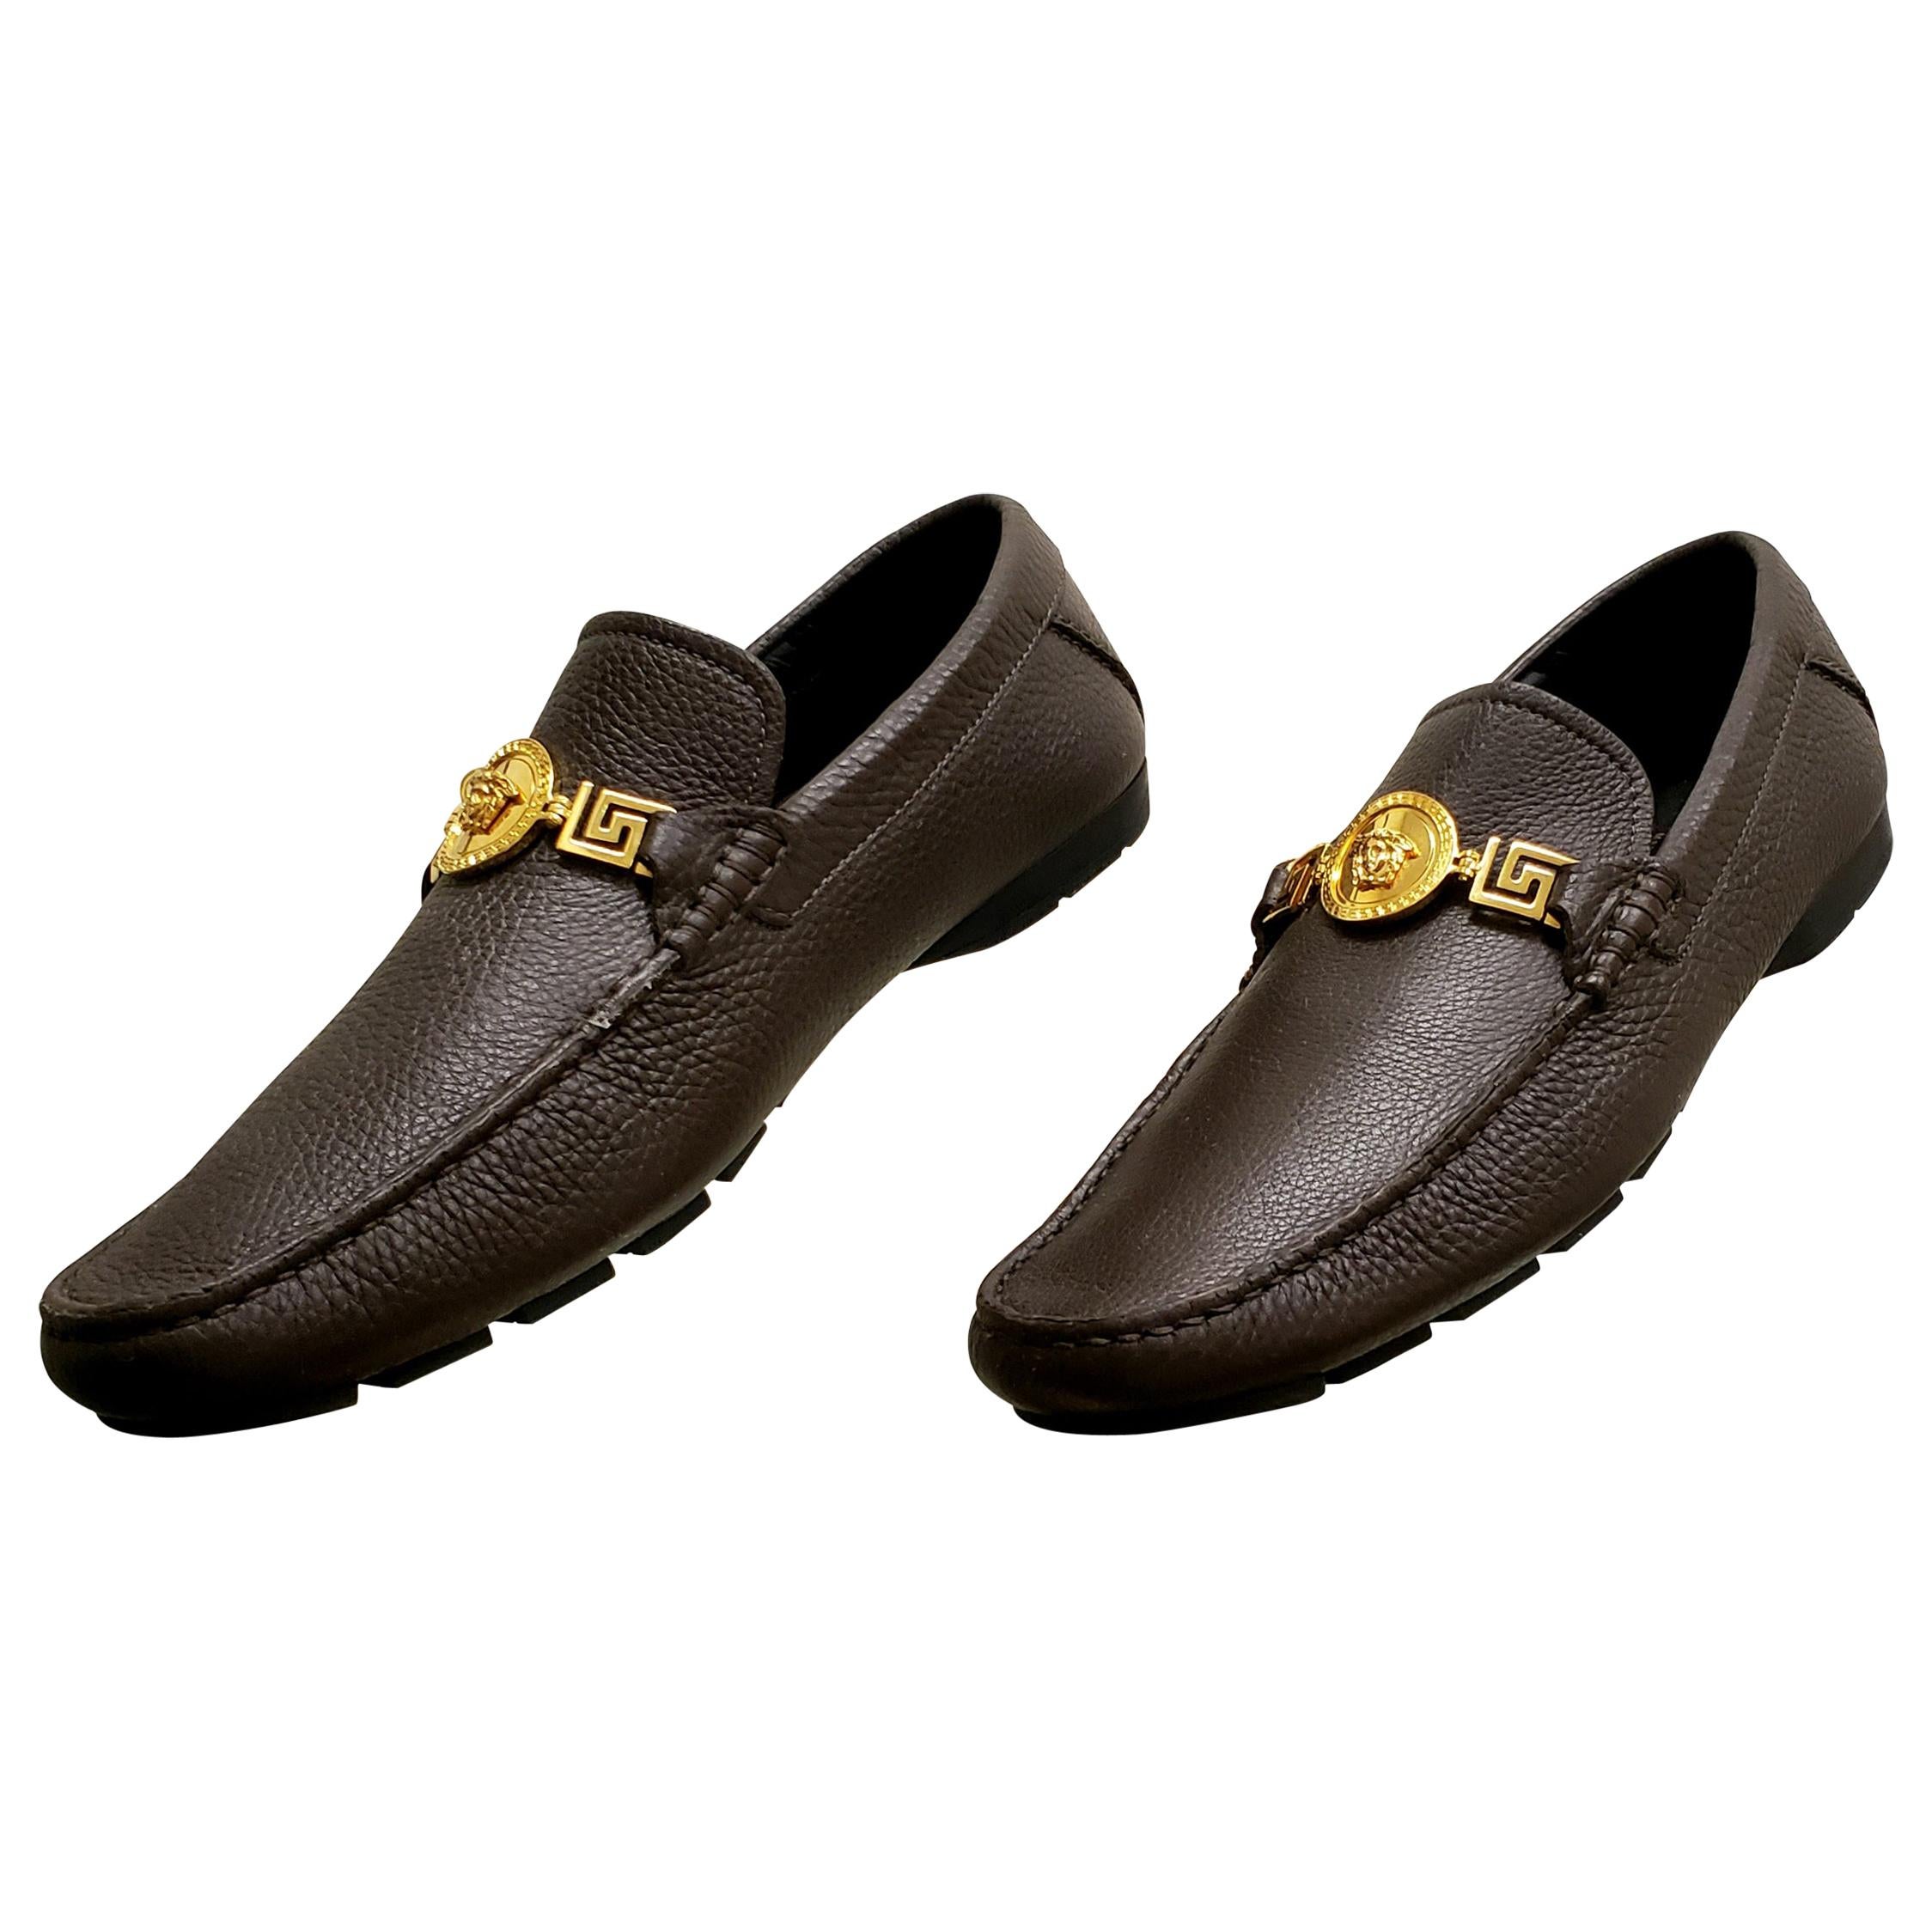 NEW VERSACE BROWN LEATHER DRIVER LOAFER SHOES w/ MEDUSA MEDALLION 40.5 - 7.5 For Sale at